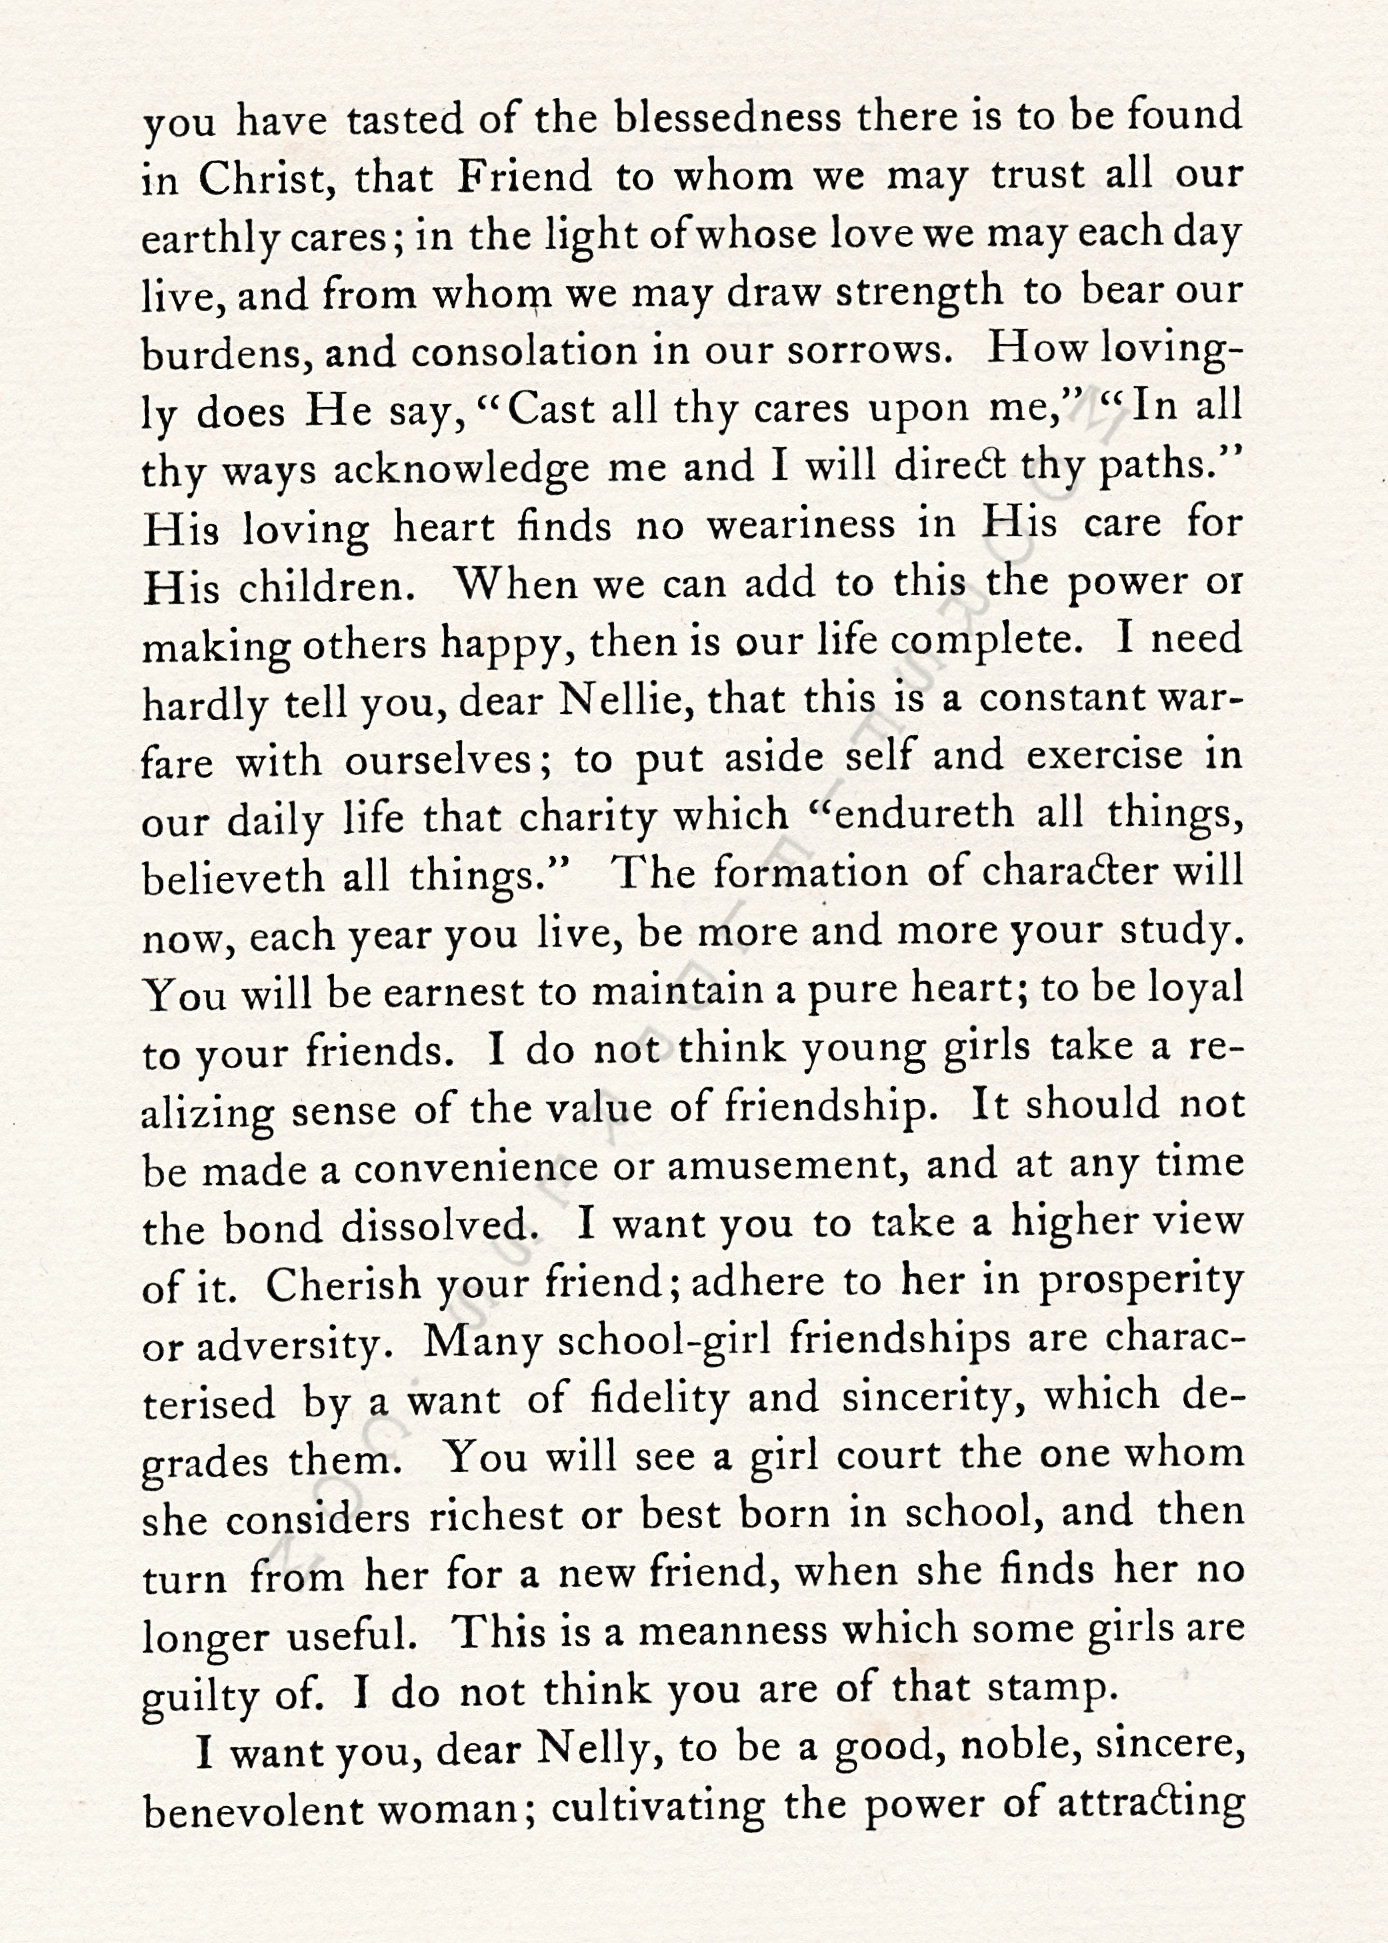 a letter
                      ofmrs laura moore nye written on the
                      eighteenthbirthday of her daughter ellen rose nye